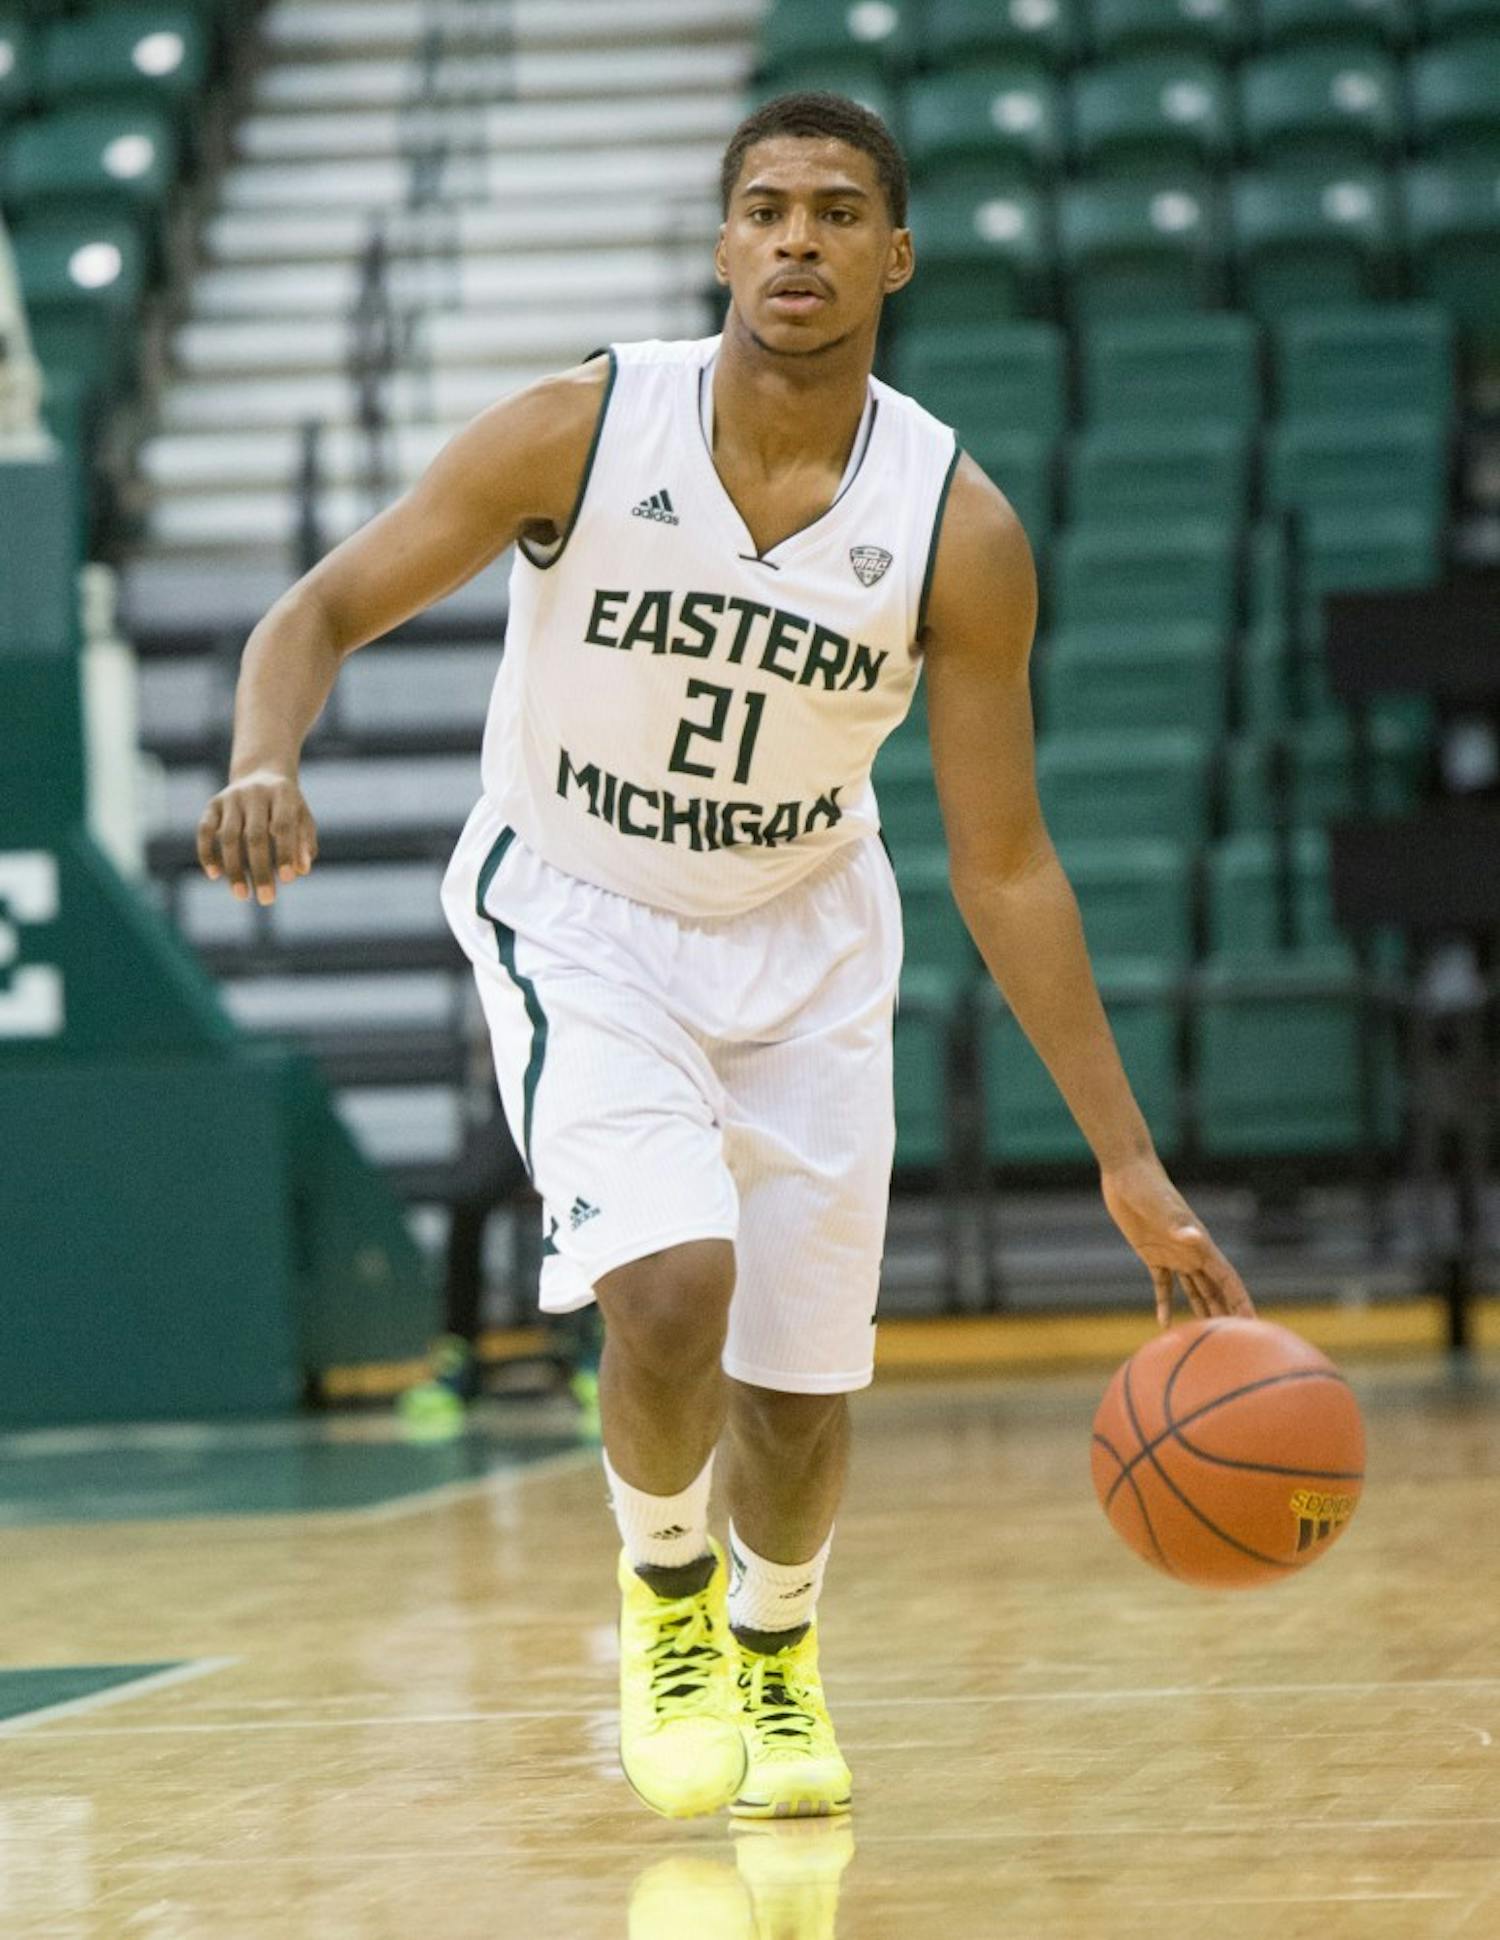 EMU guard Jalen Ross (21) scored 7 points for Eastern in their 92-54 win over Rochester College Saturday afternoon.